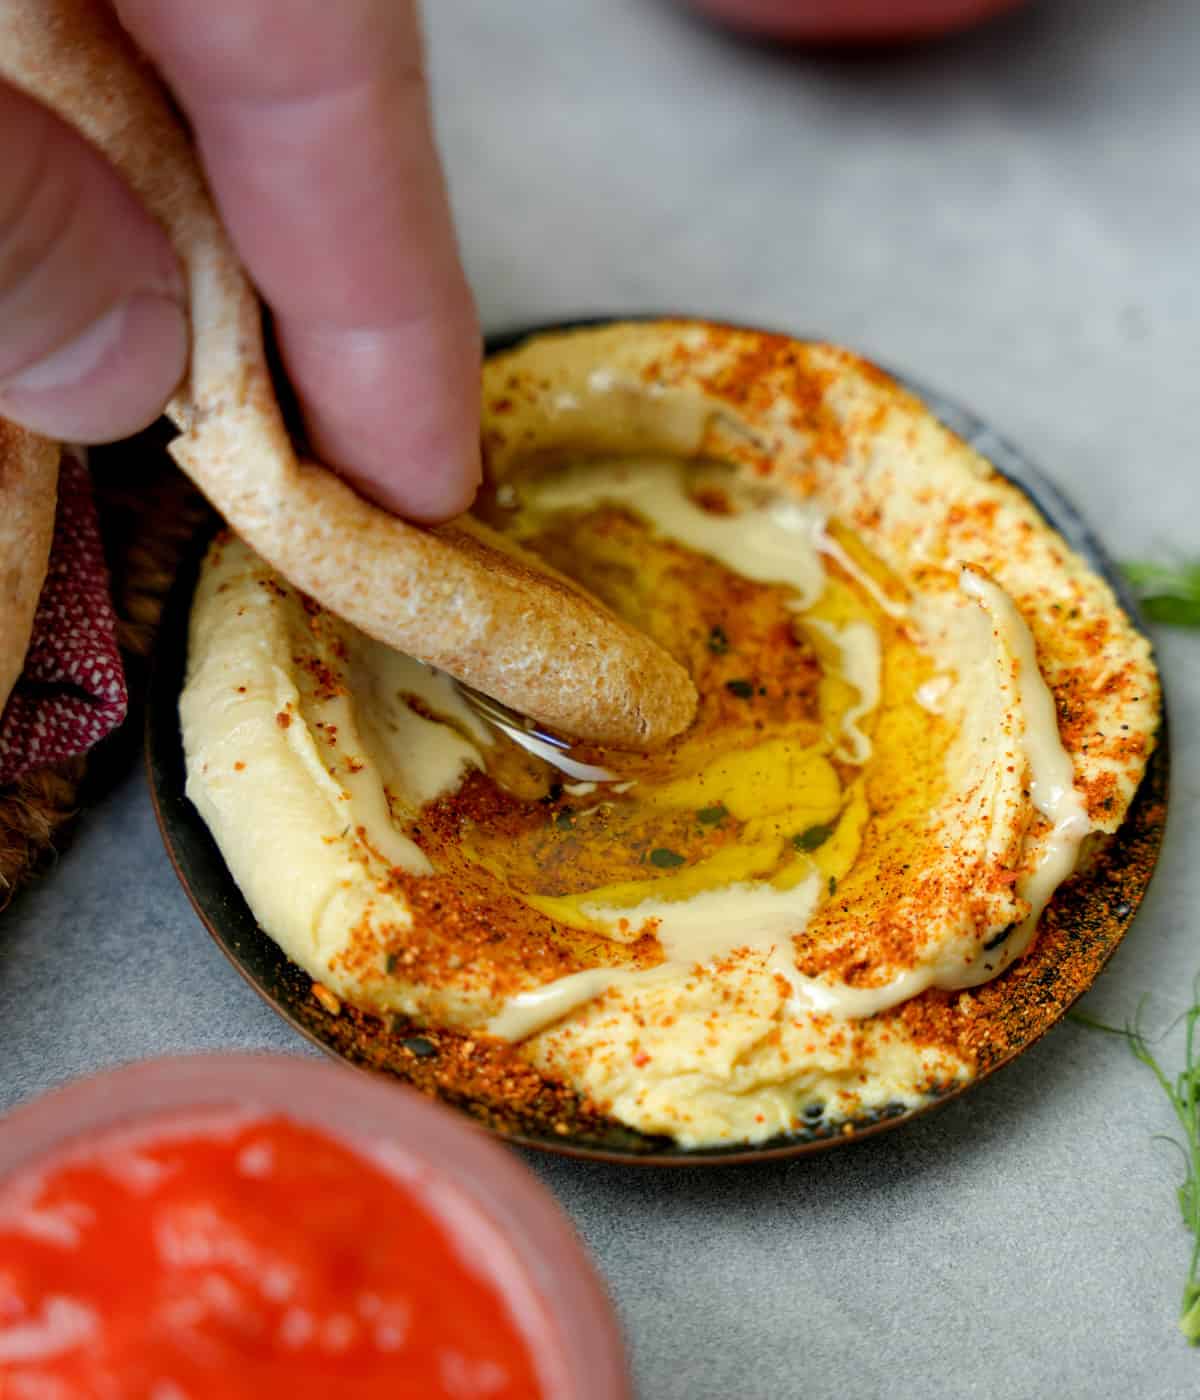 Hummus being eaten with a torn off piece of pita bread.